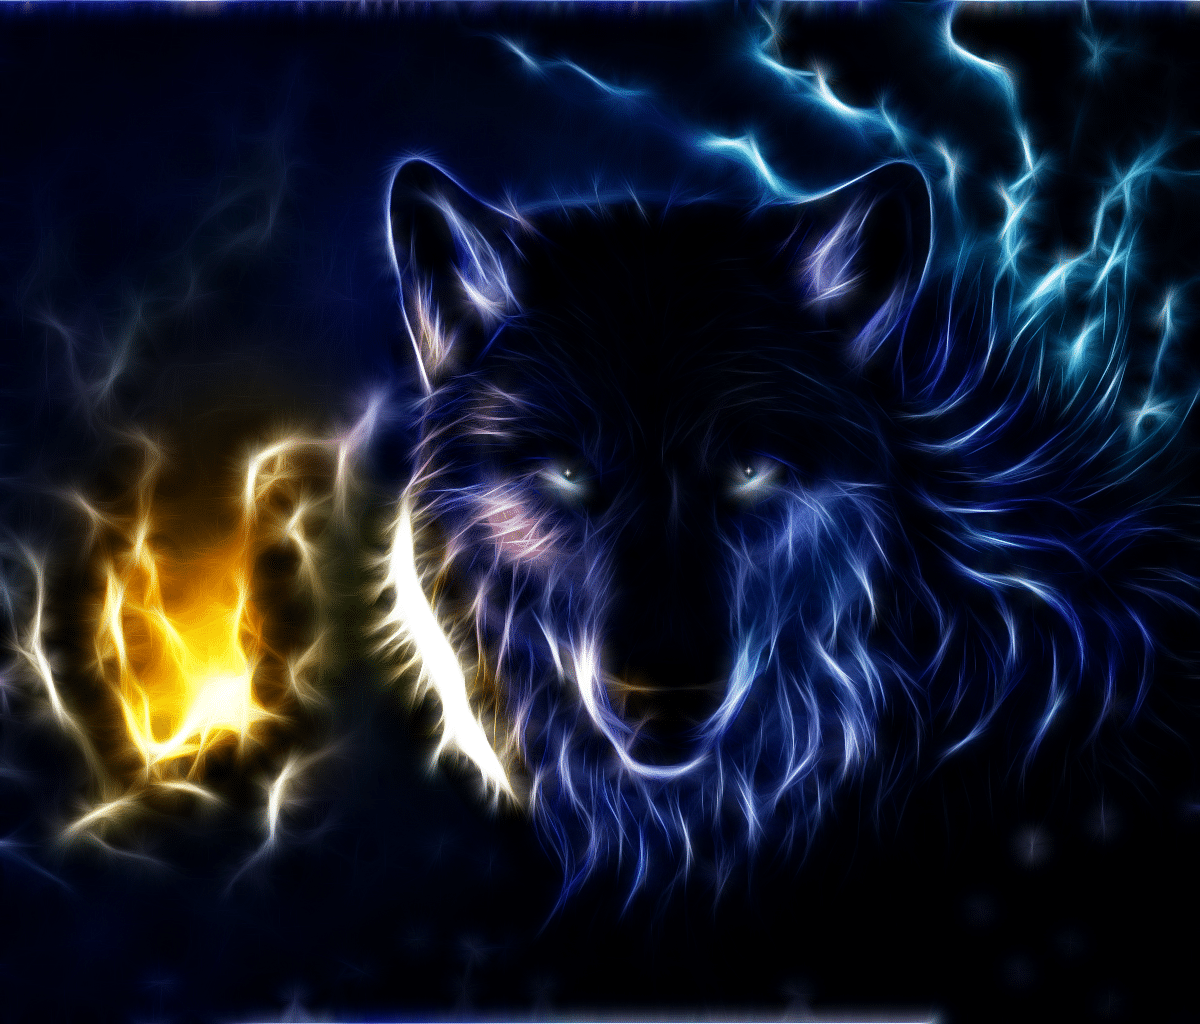 electricwolf-png.7392